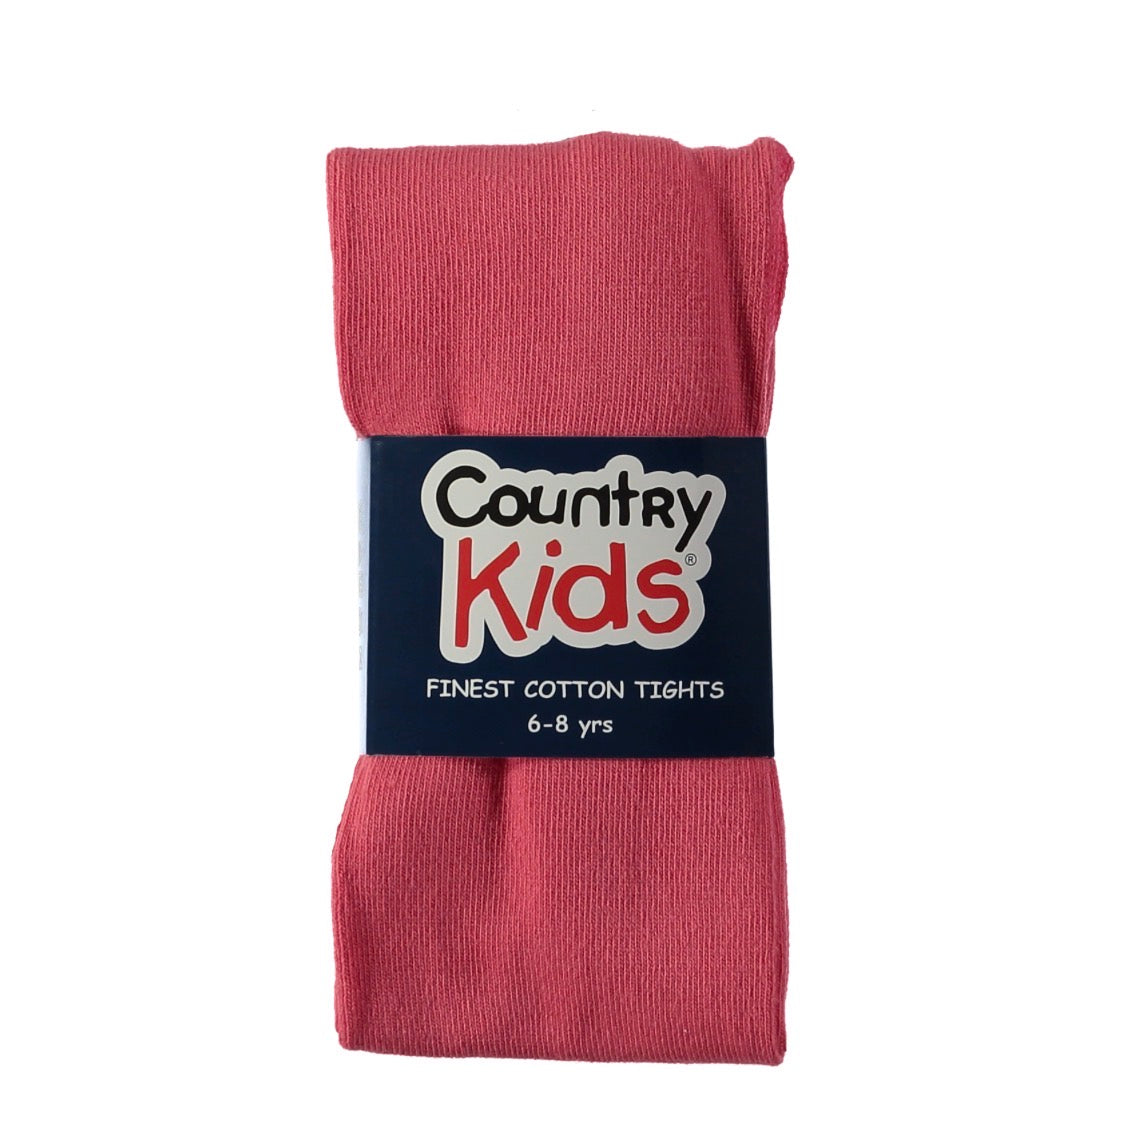 Country Kids Plain Tights Coral Pink Clothing 6-8YRS / Coral,9-11YRS / Coral